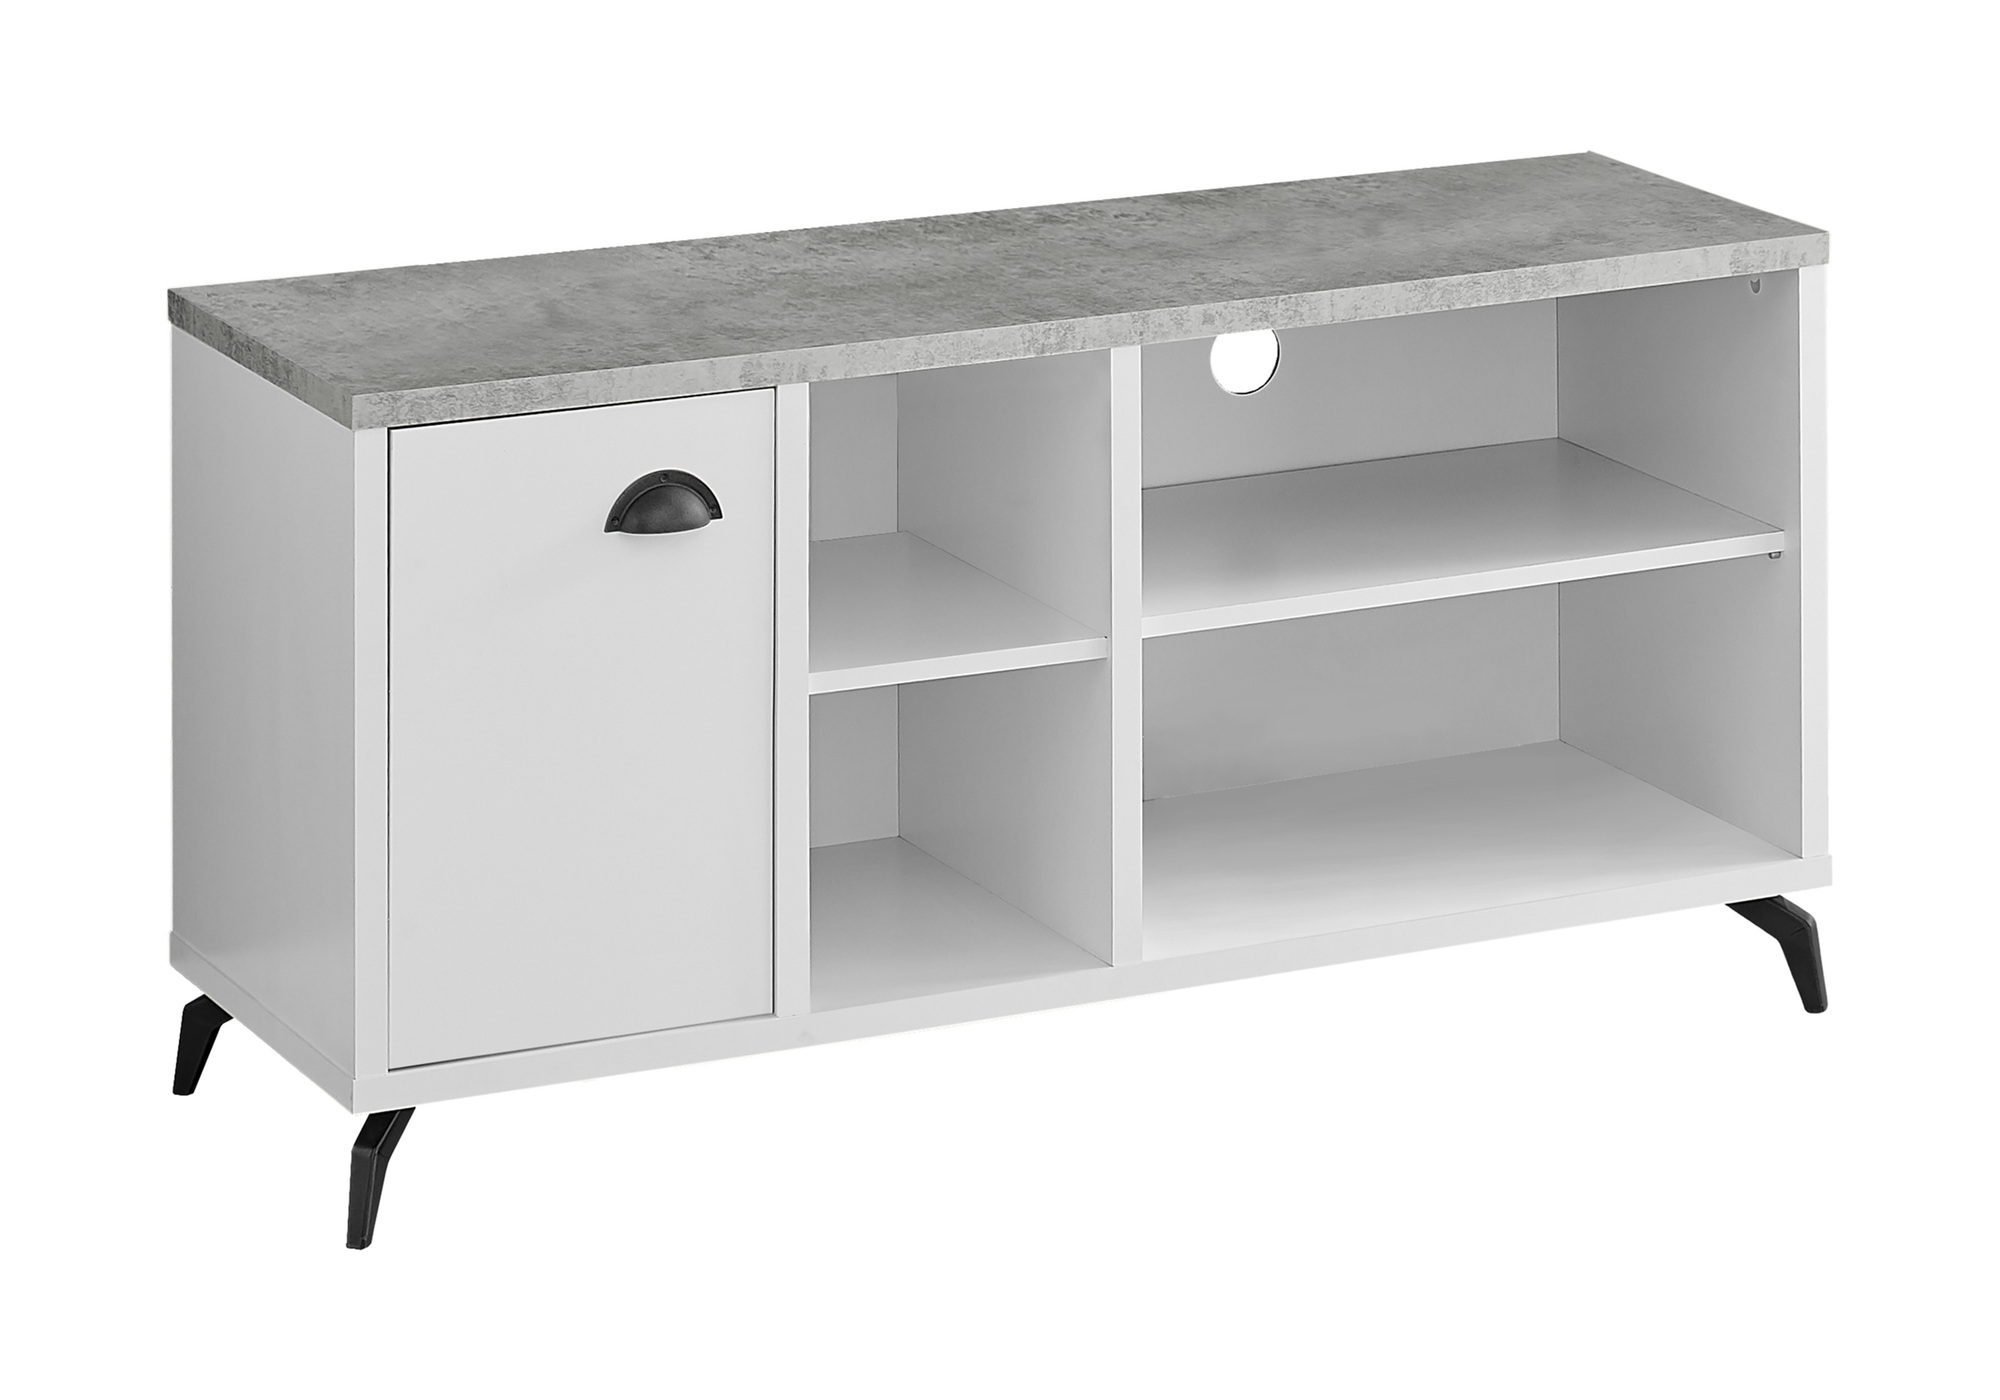 Monarch Specialties TV STAND - 48"L / WHITE / GREY CEMENT-LOOK TOP